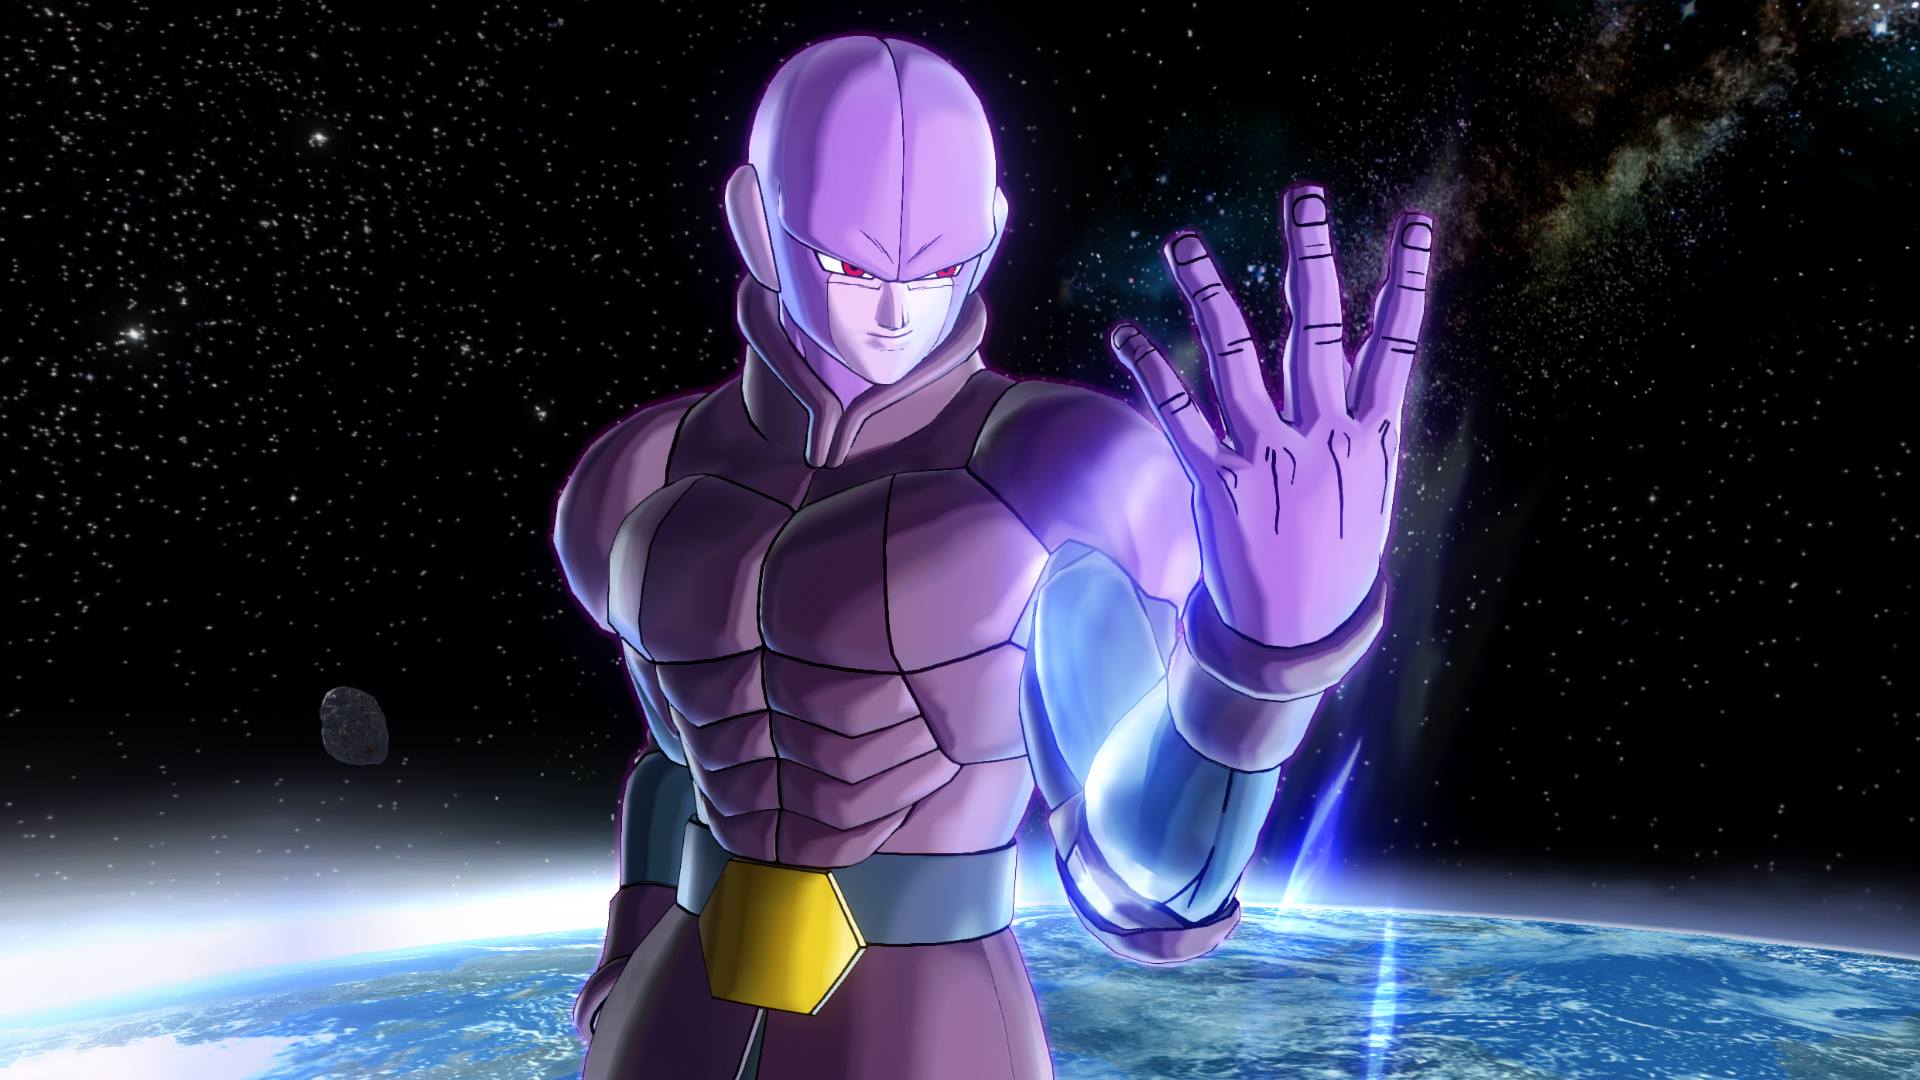 Dragon Ball Xenoverse 2 Legendary Pack 1 Gets Extended Trailer